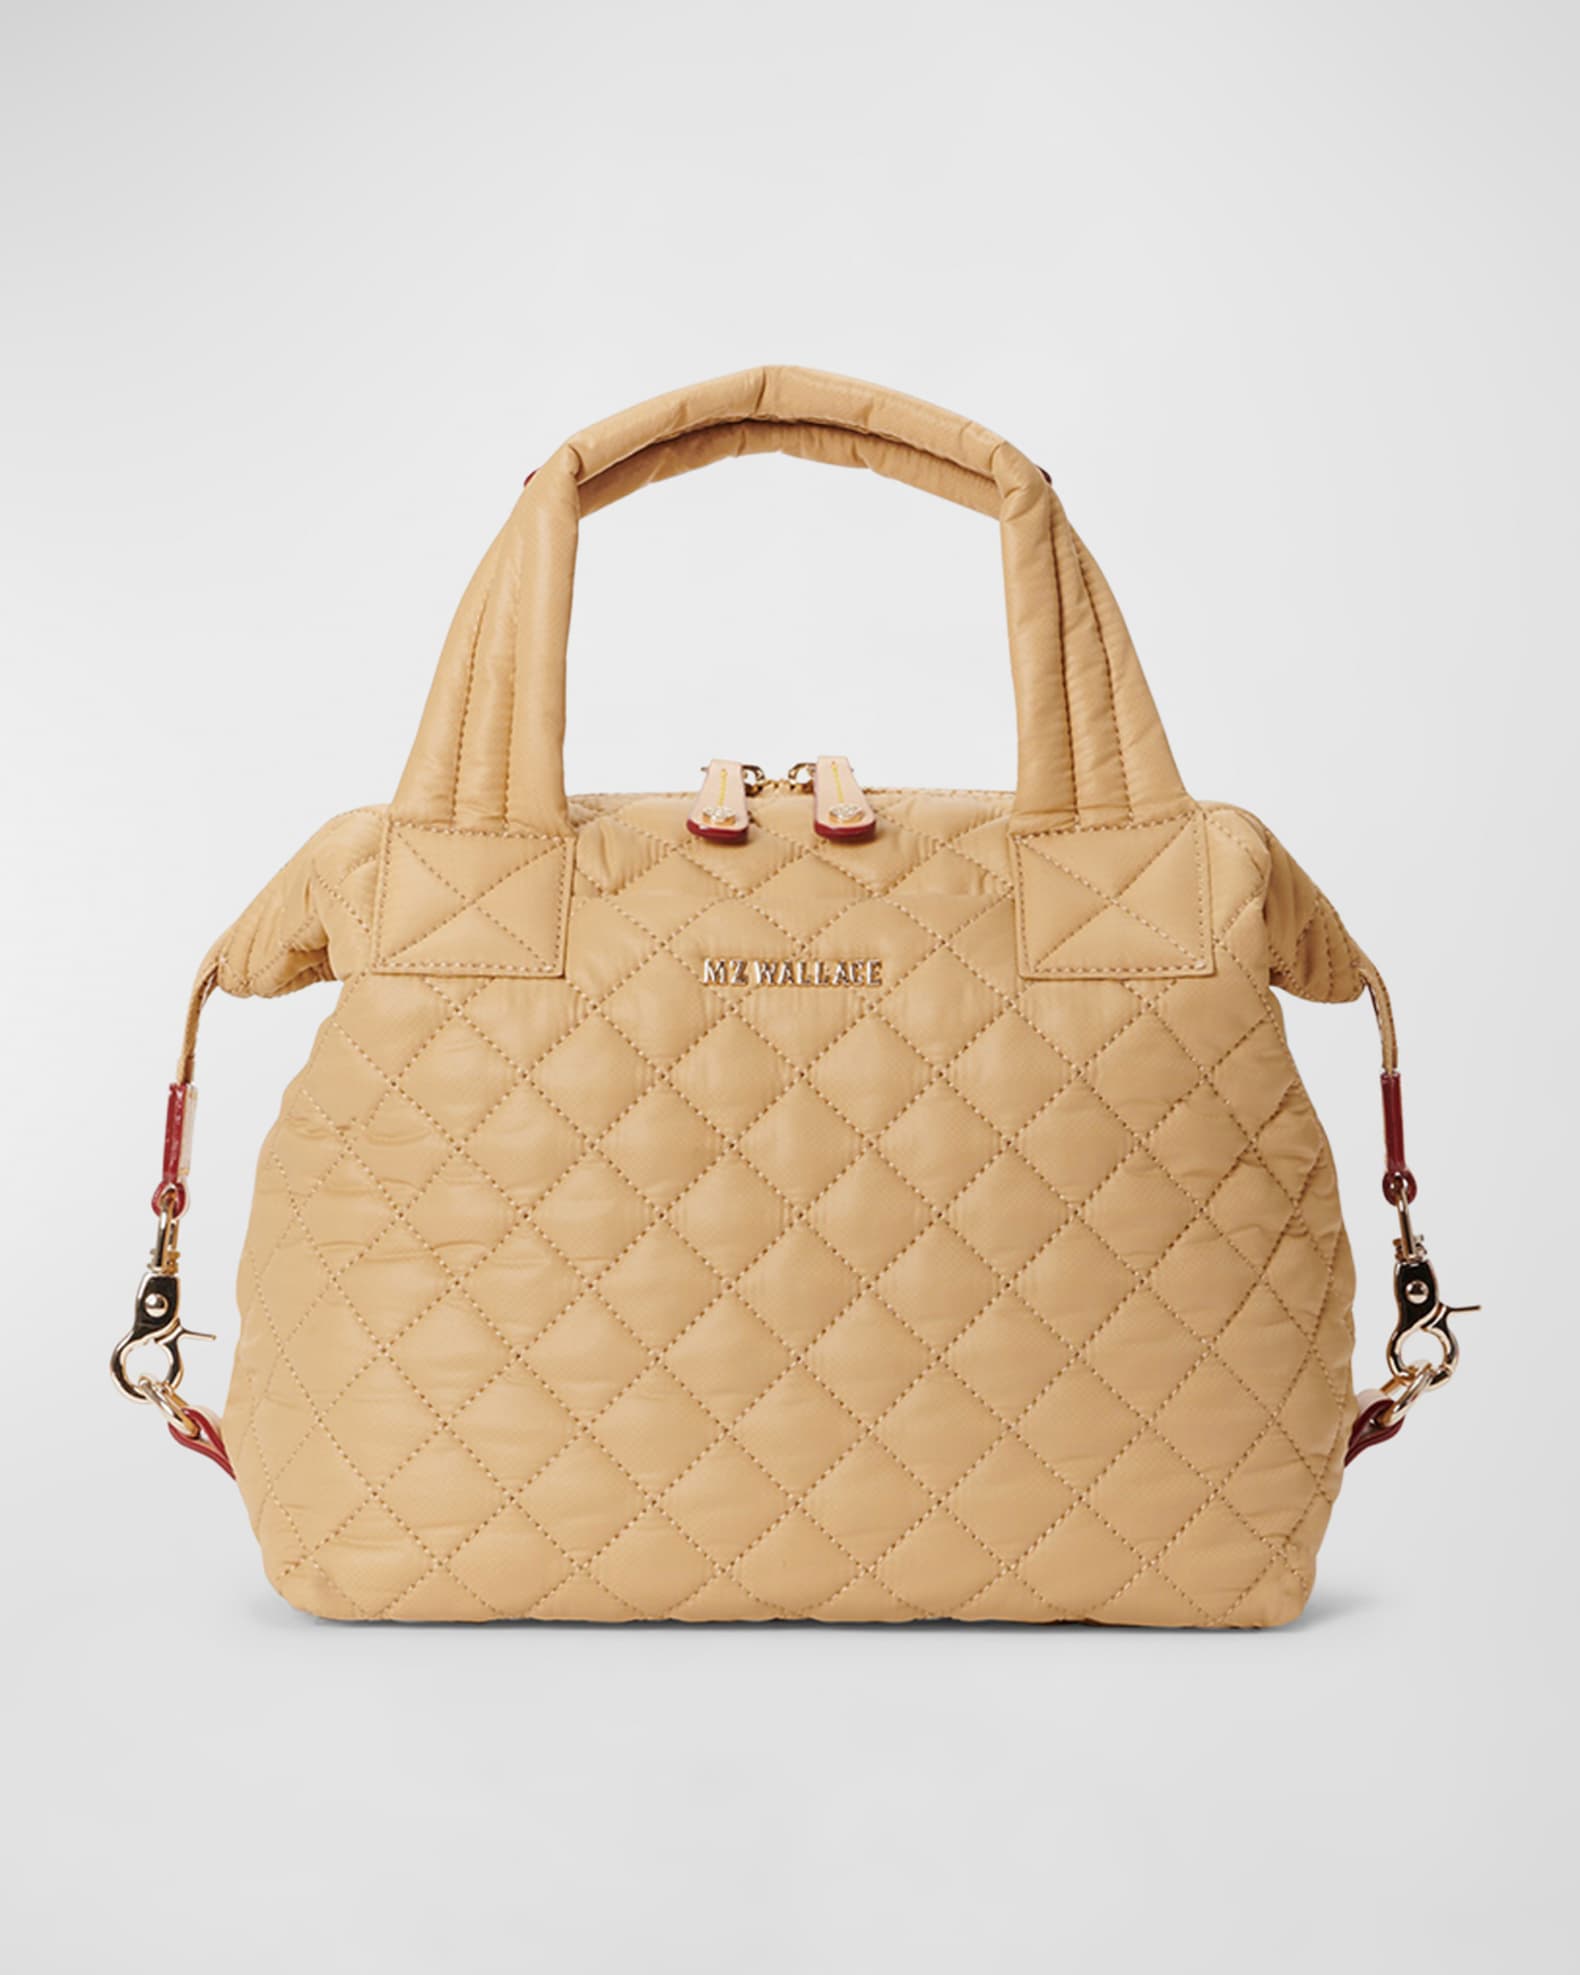 Women's MZ Wallace Top-handle bags from $65